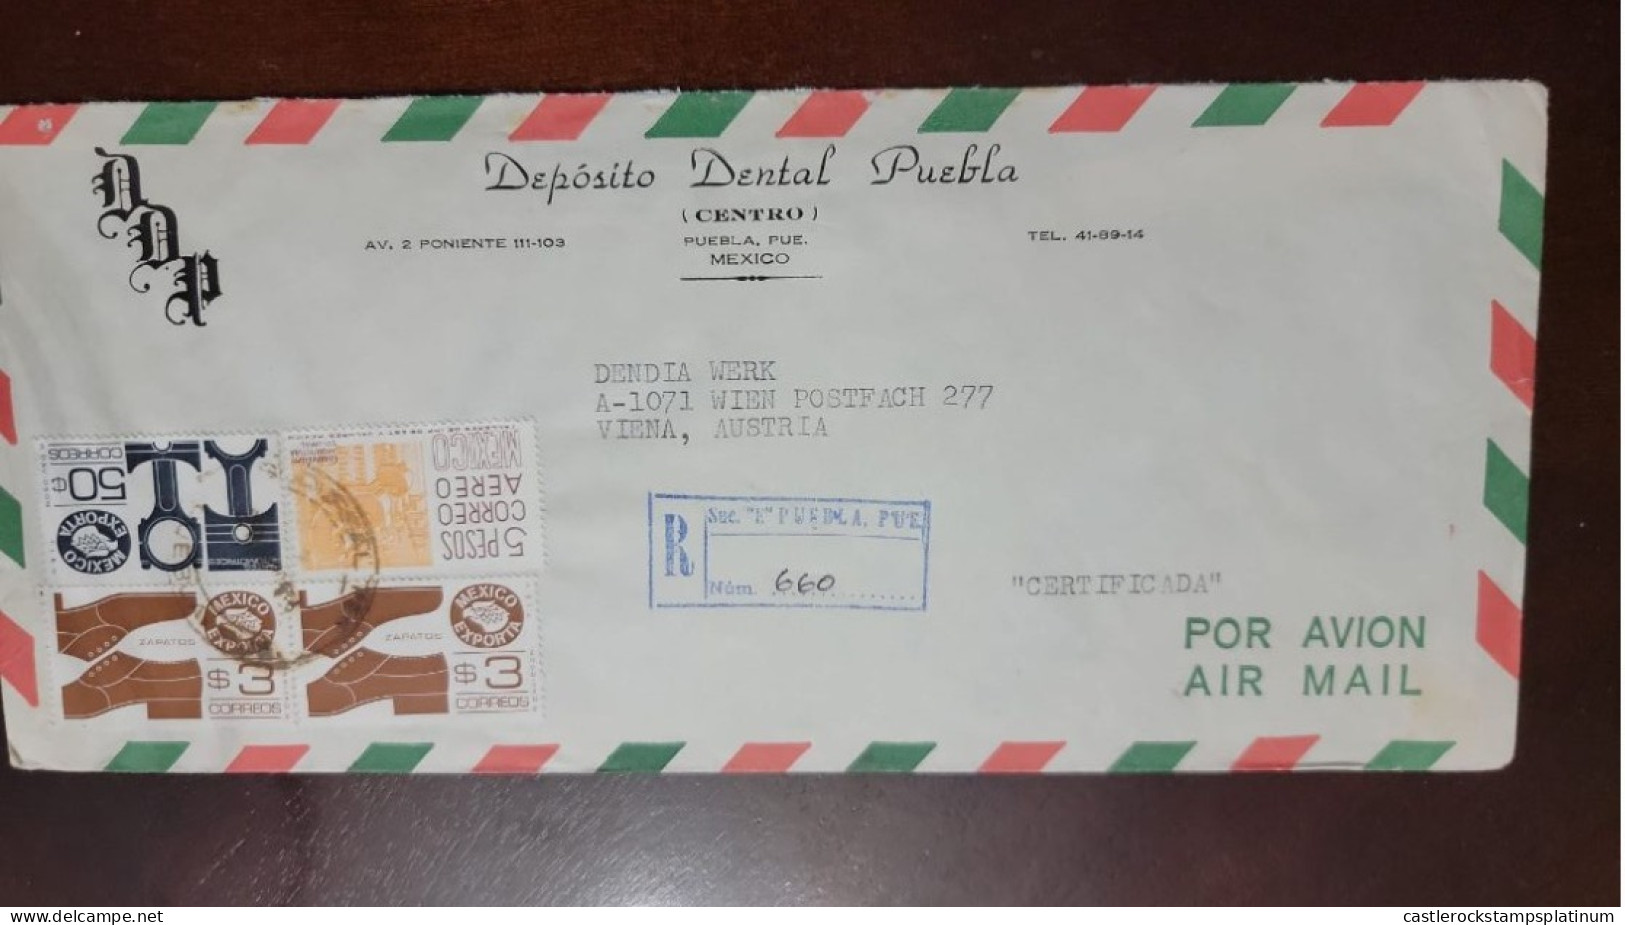 P) 1980 MEXICO, MEXICO EXPORTS INDUSTRY, DENTAL DEPOSIT PUEBLA, AIRMAIL, COVER CIRCULATED TO AUSTRIA, XF - Mexico